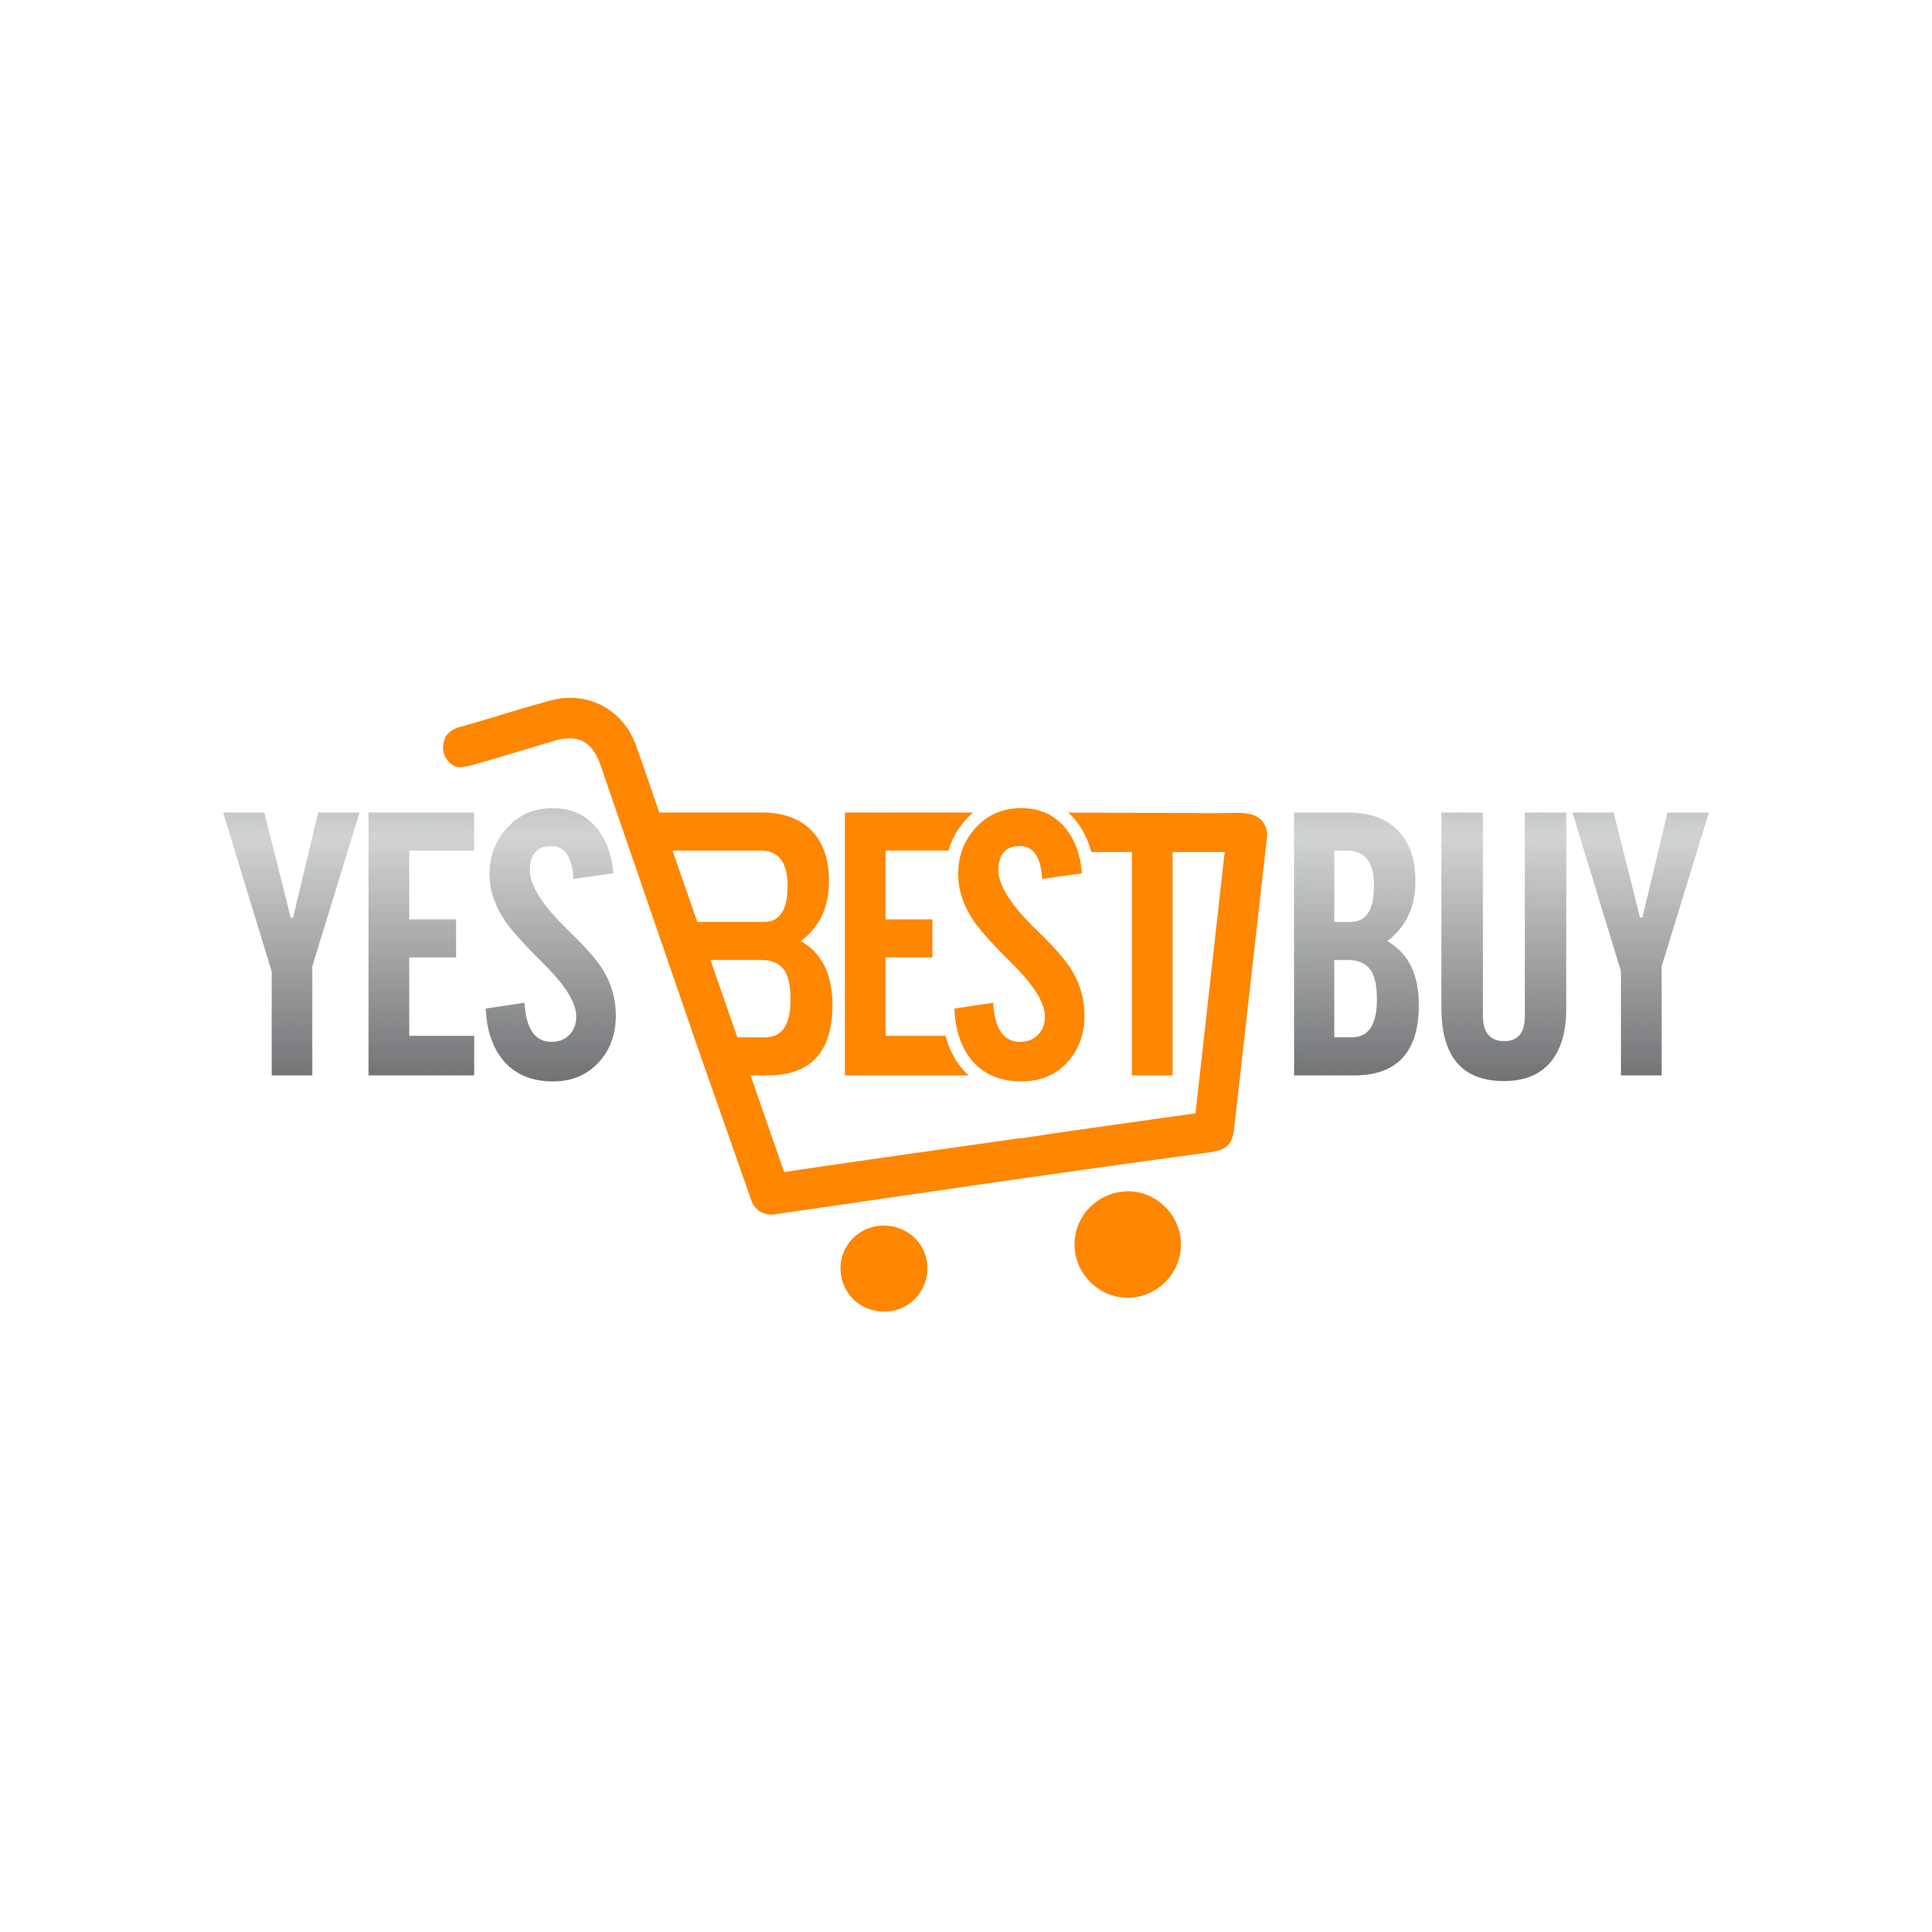 YESBESTBUY's profile picture